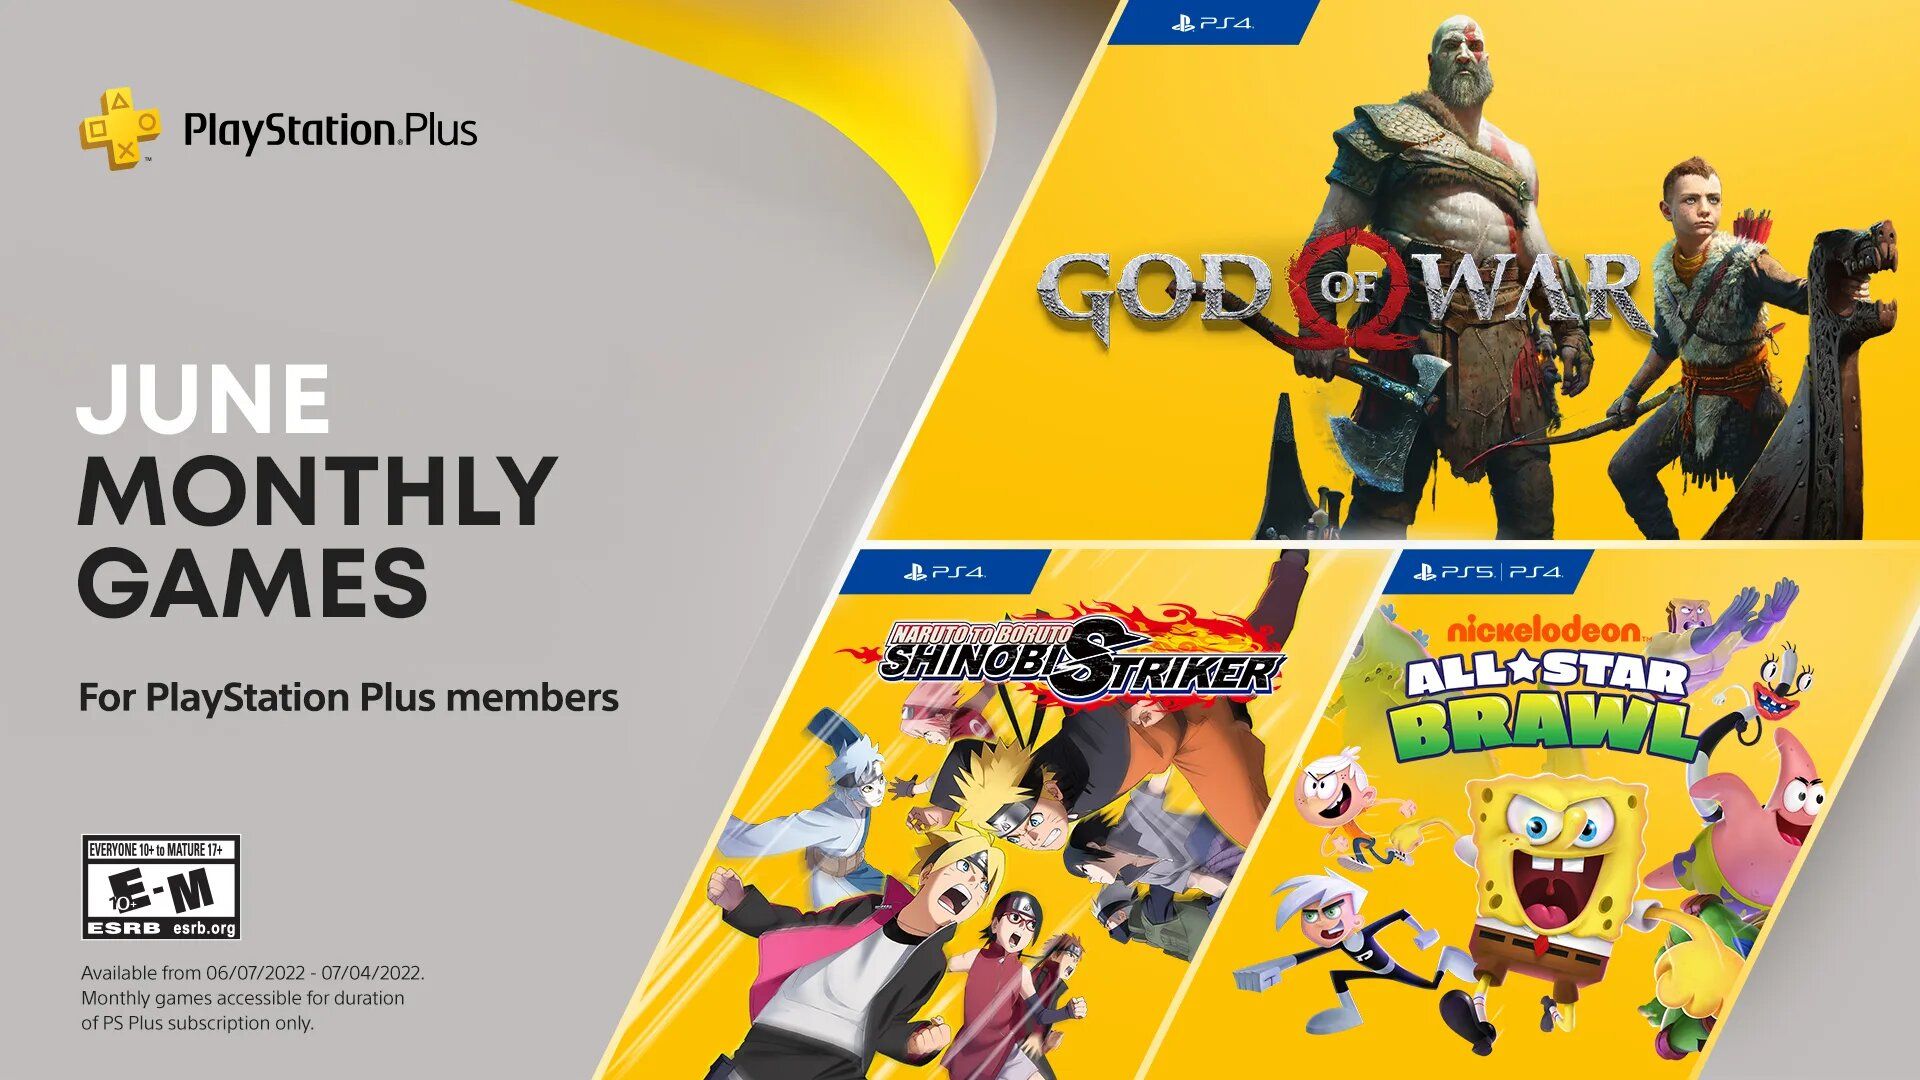 PS Plus Free Games for June 2022 Are Available Now